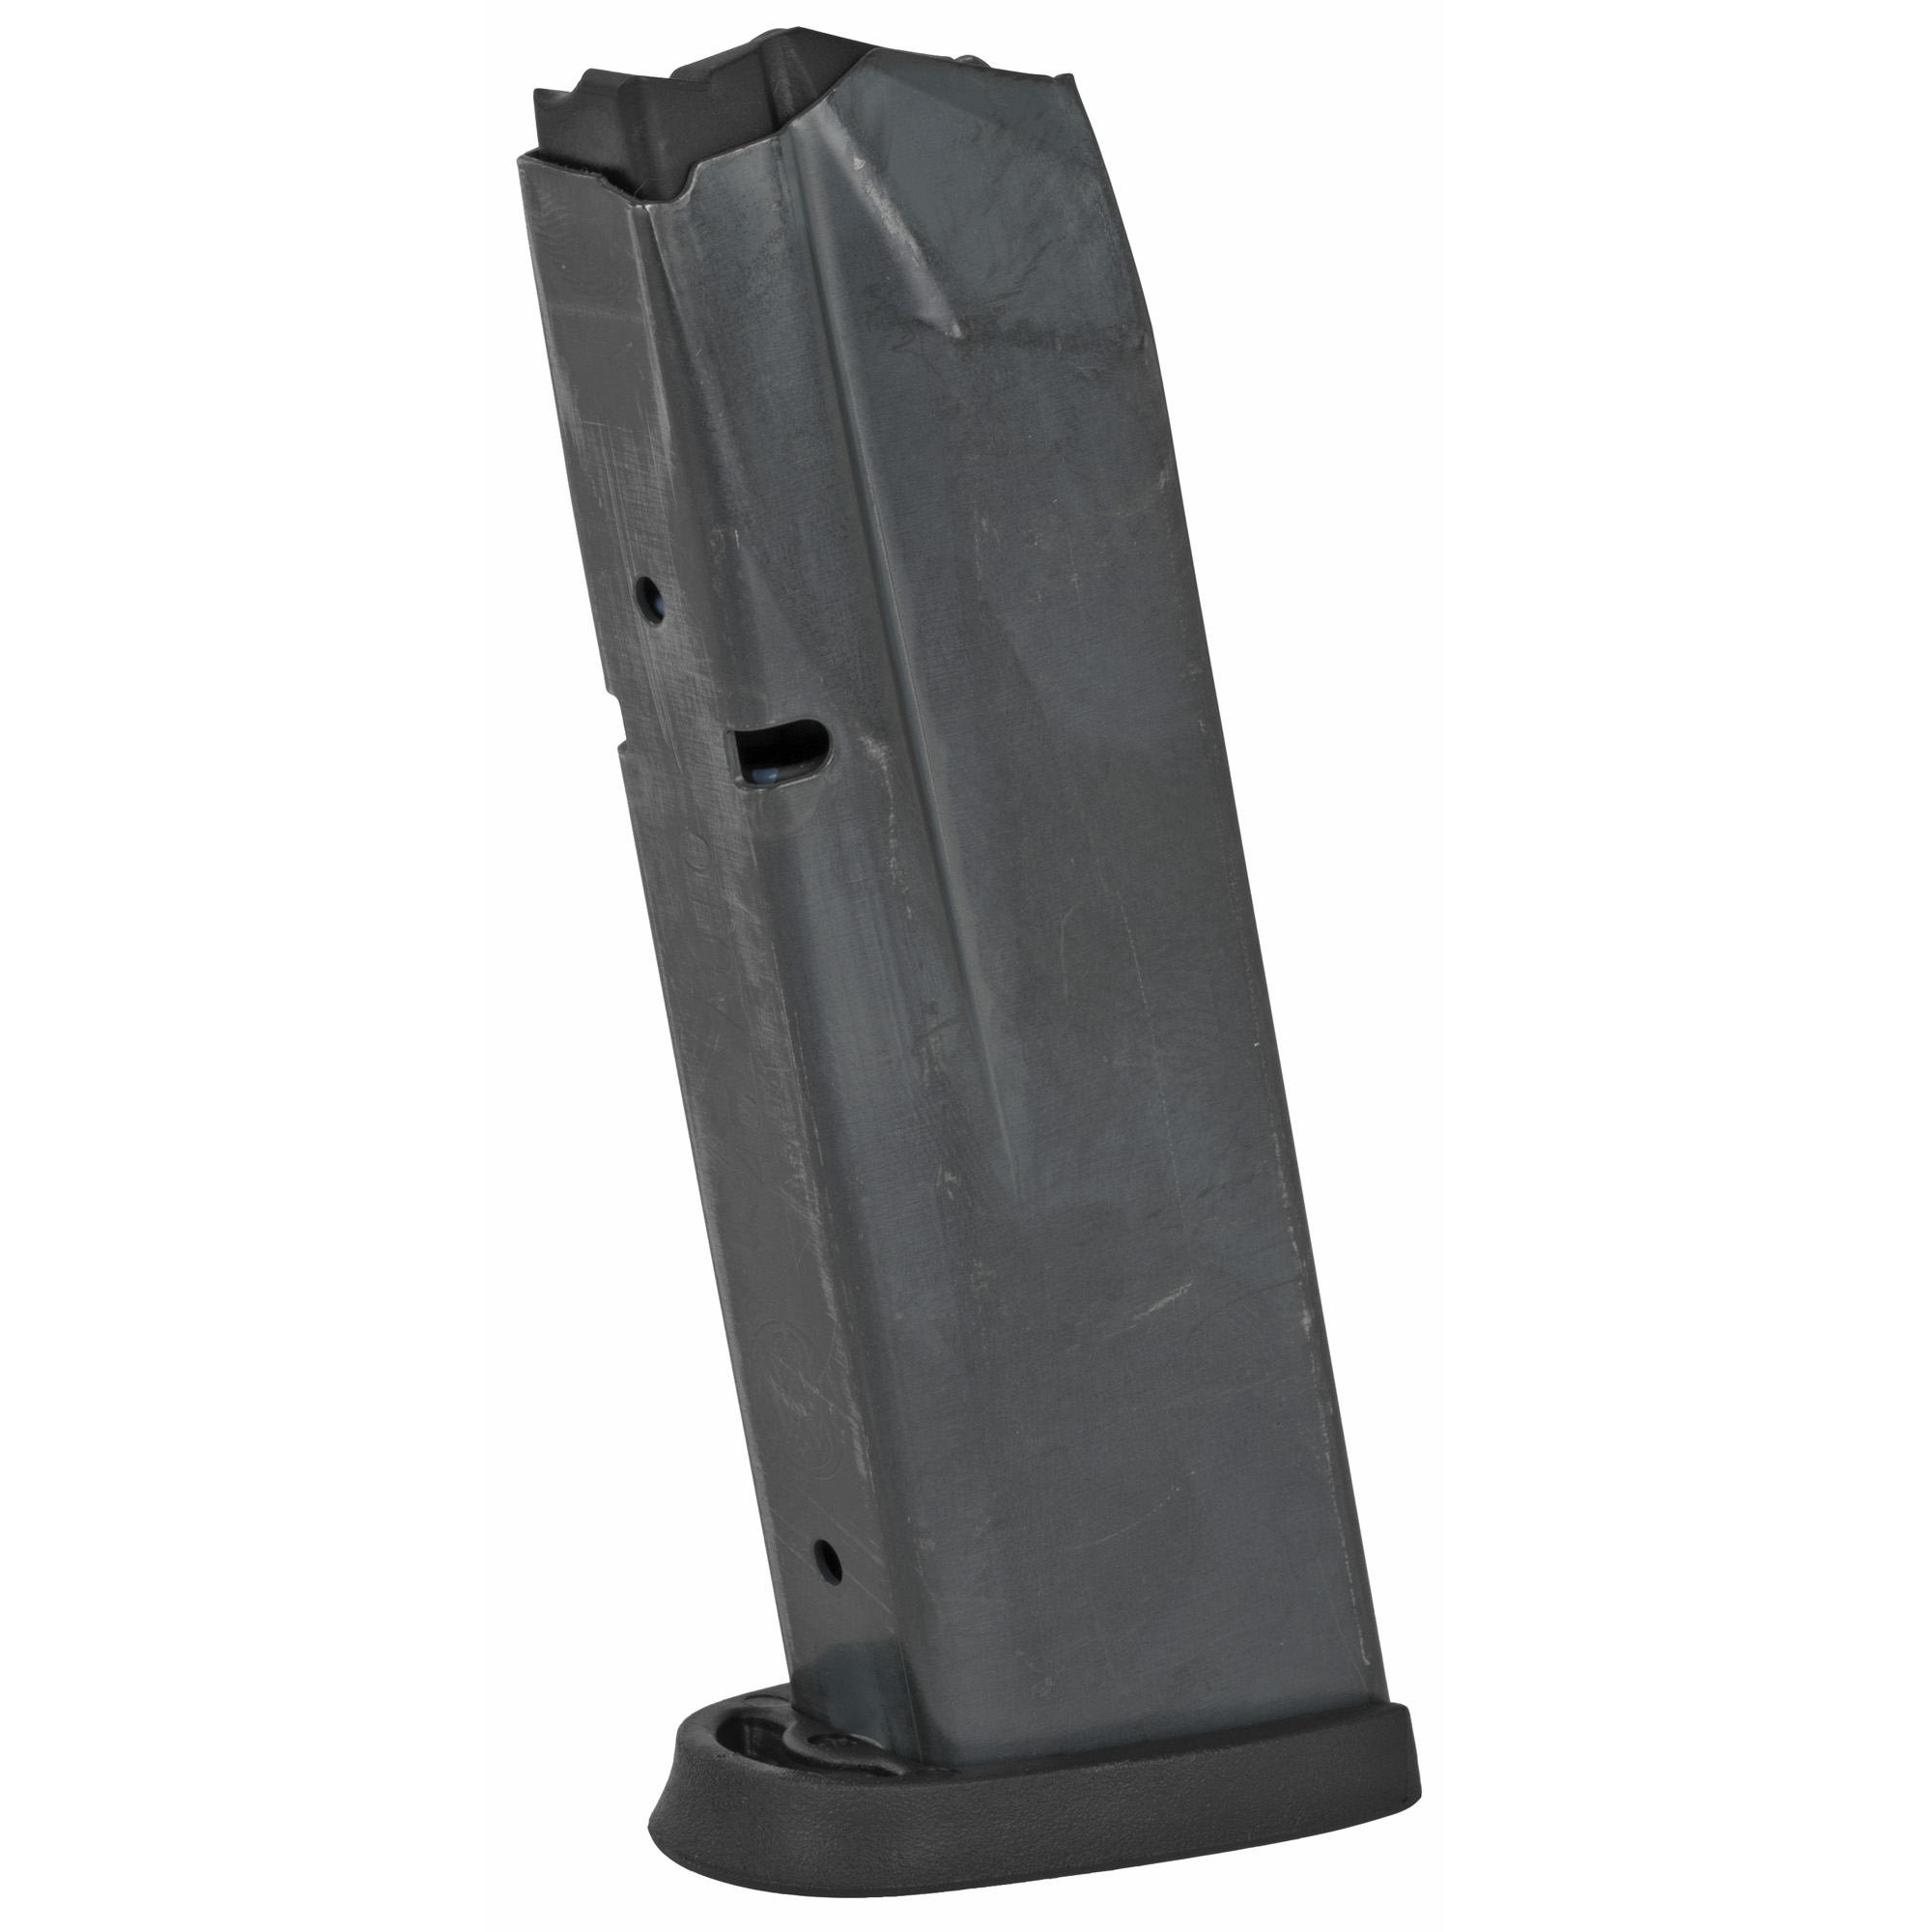 MAG S&W M&P 45 10RD BLK BASE - for sale